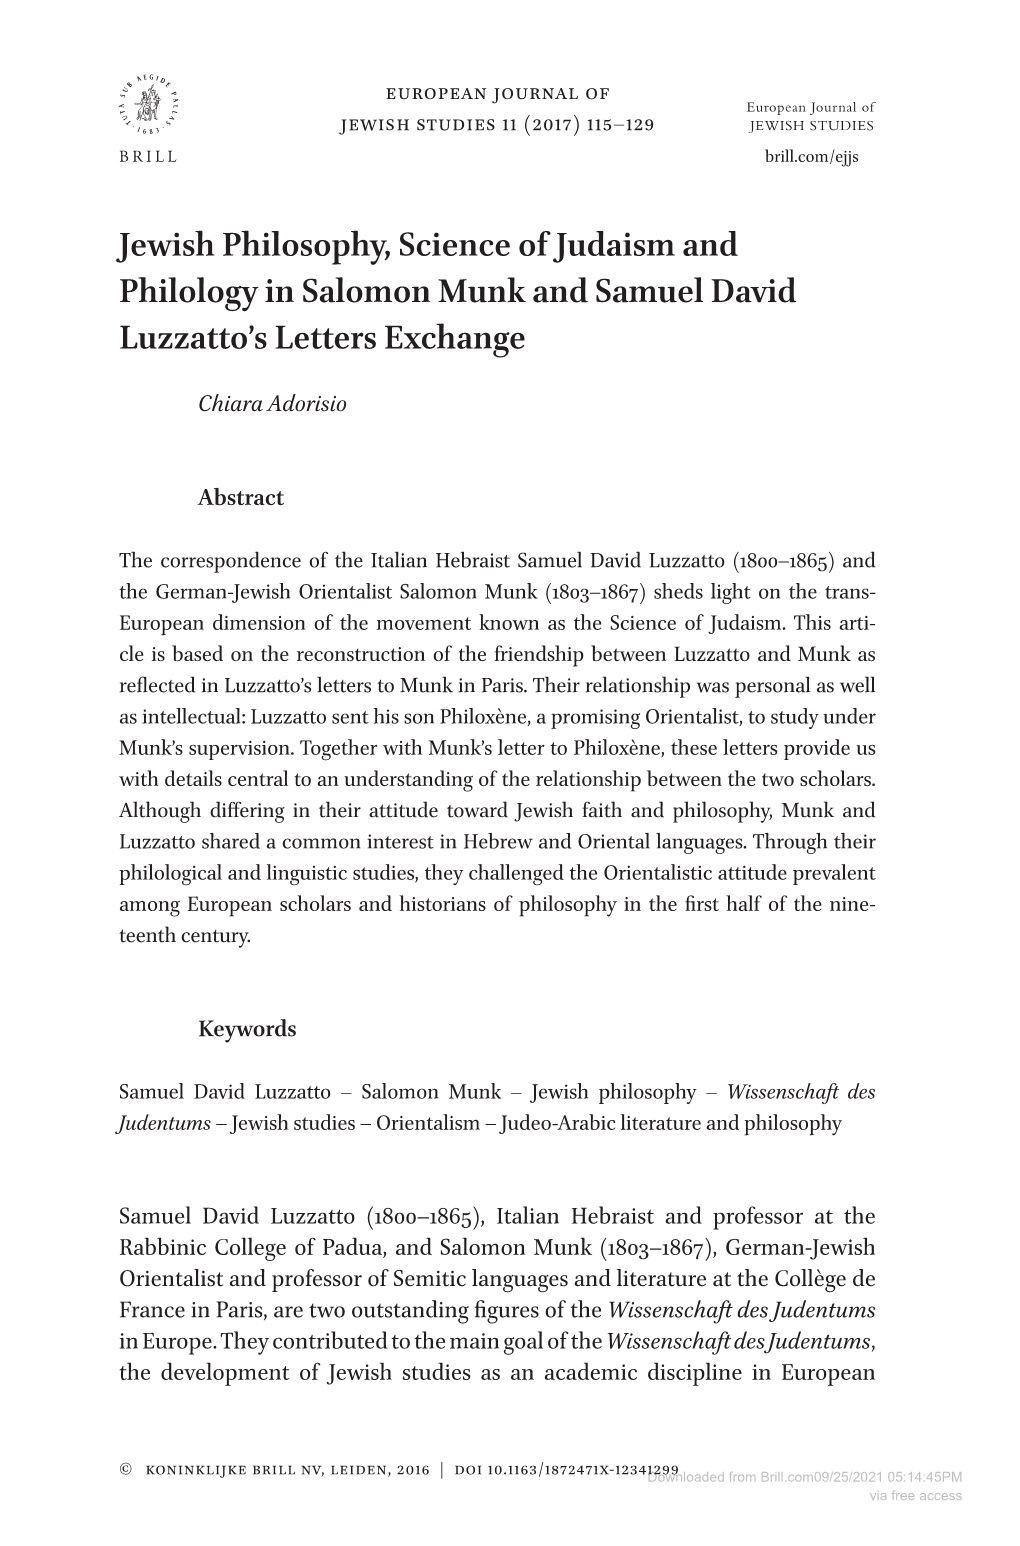 Jewish Philosophy, Science of Judaism and Philology in Salomon Munk and Samuel David Luzzatto’S Letters Exchange